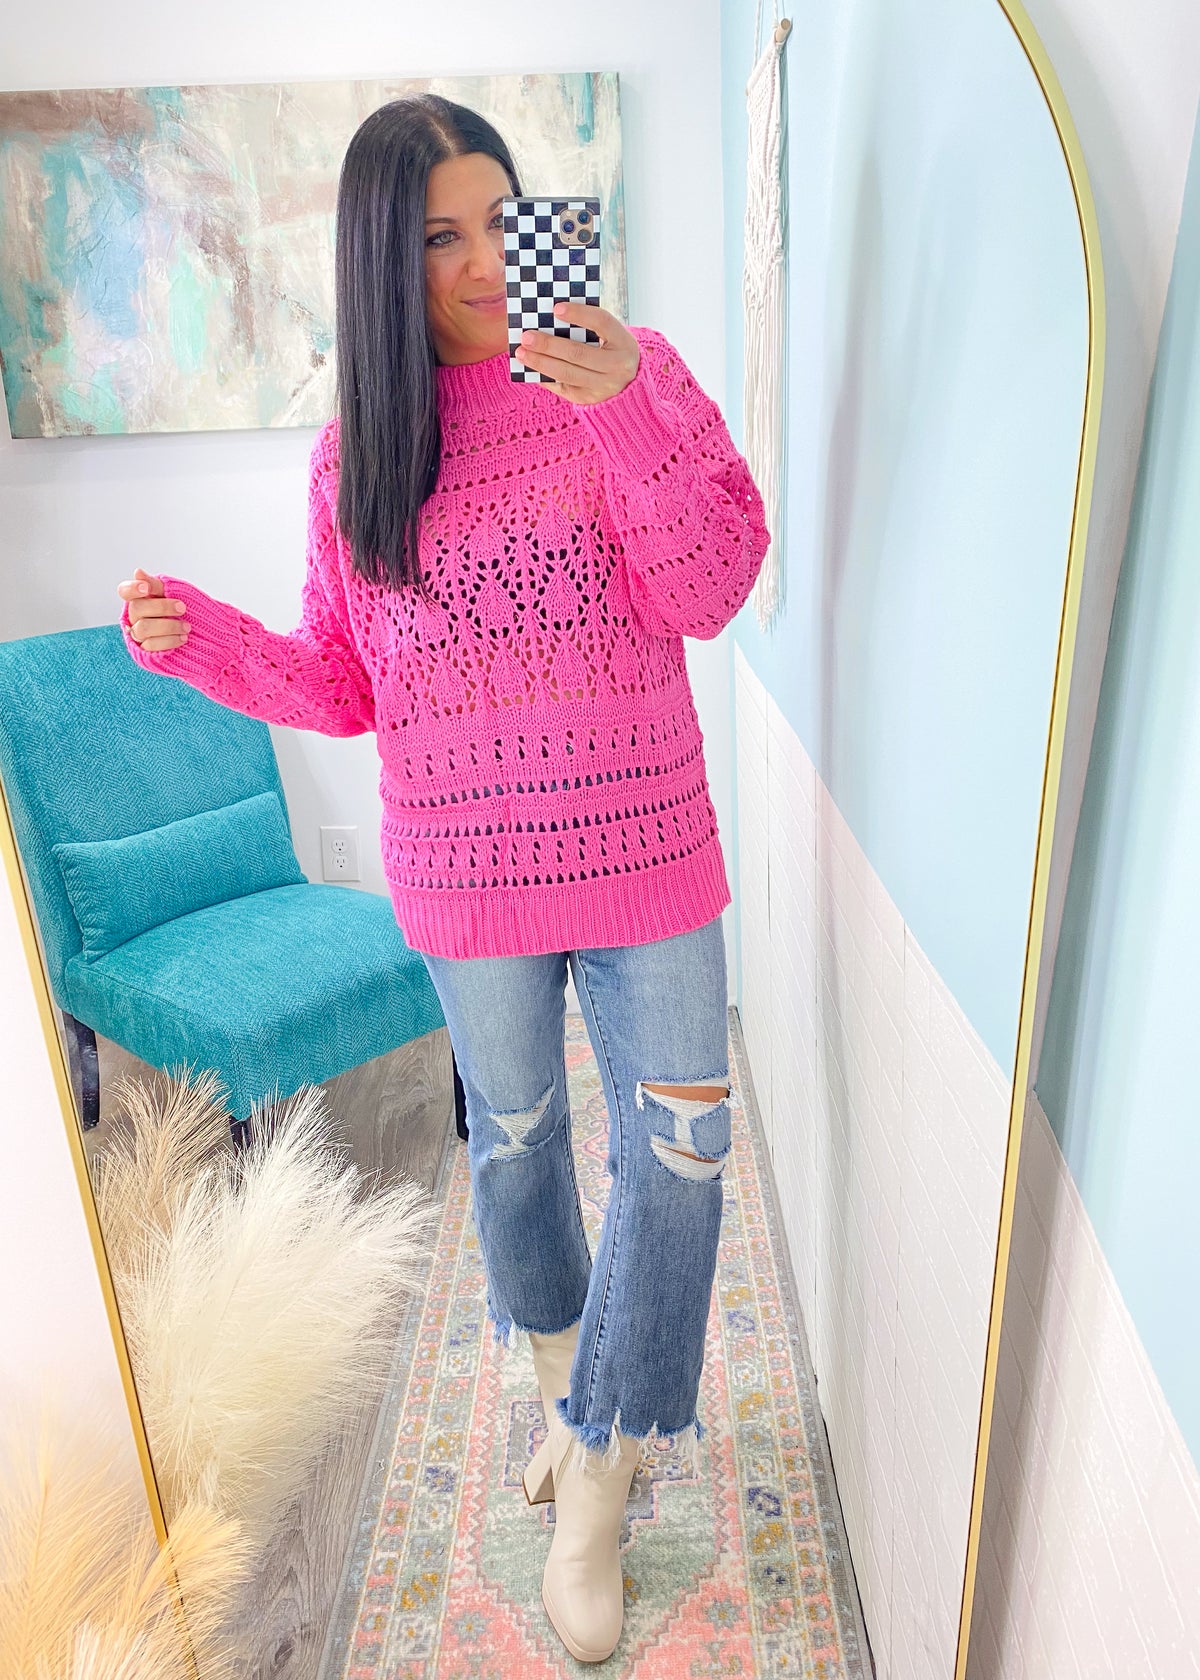 'Adore You' Oversized Hot Pink Crochet Mock Neck Sweater-This oversized fit sweater has a gorgeous crochet design. The mock neck adds a chic look & the hot pink pairs well with all shades of denim and black jeans/leggings.-Cali Moon Boutique, Plainville Connecticut